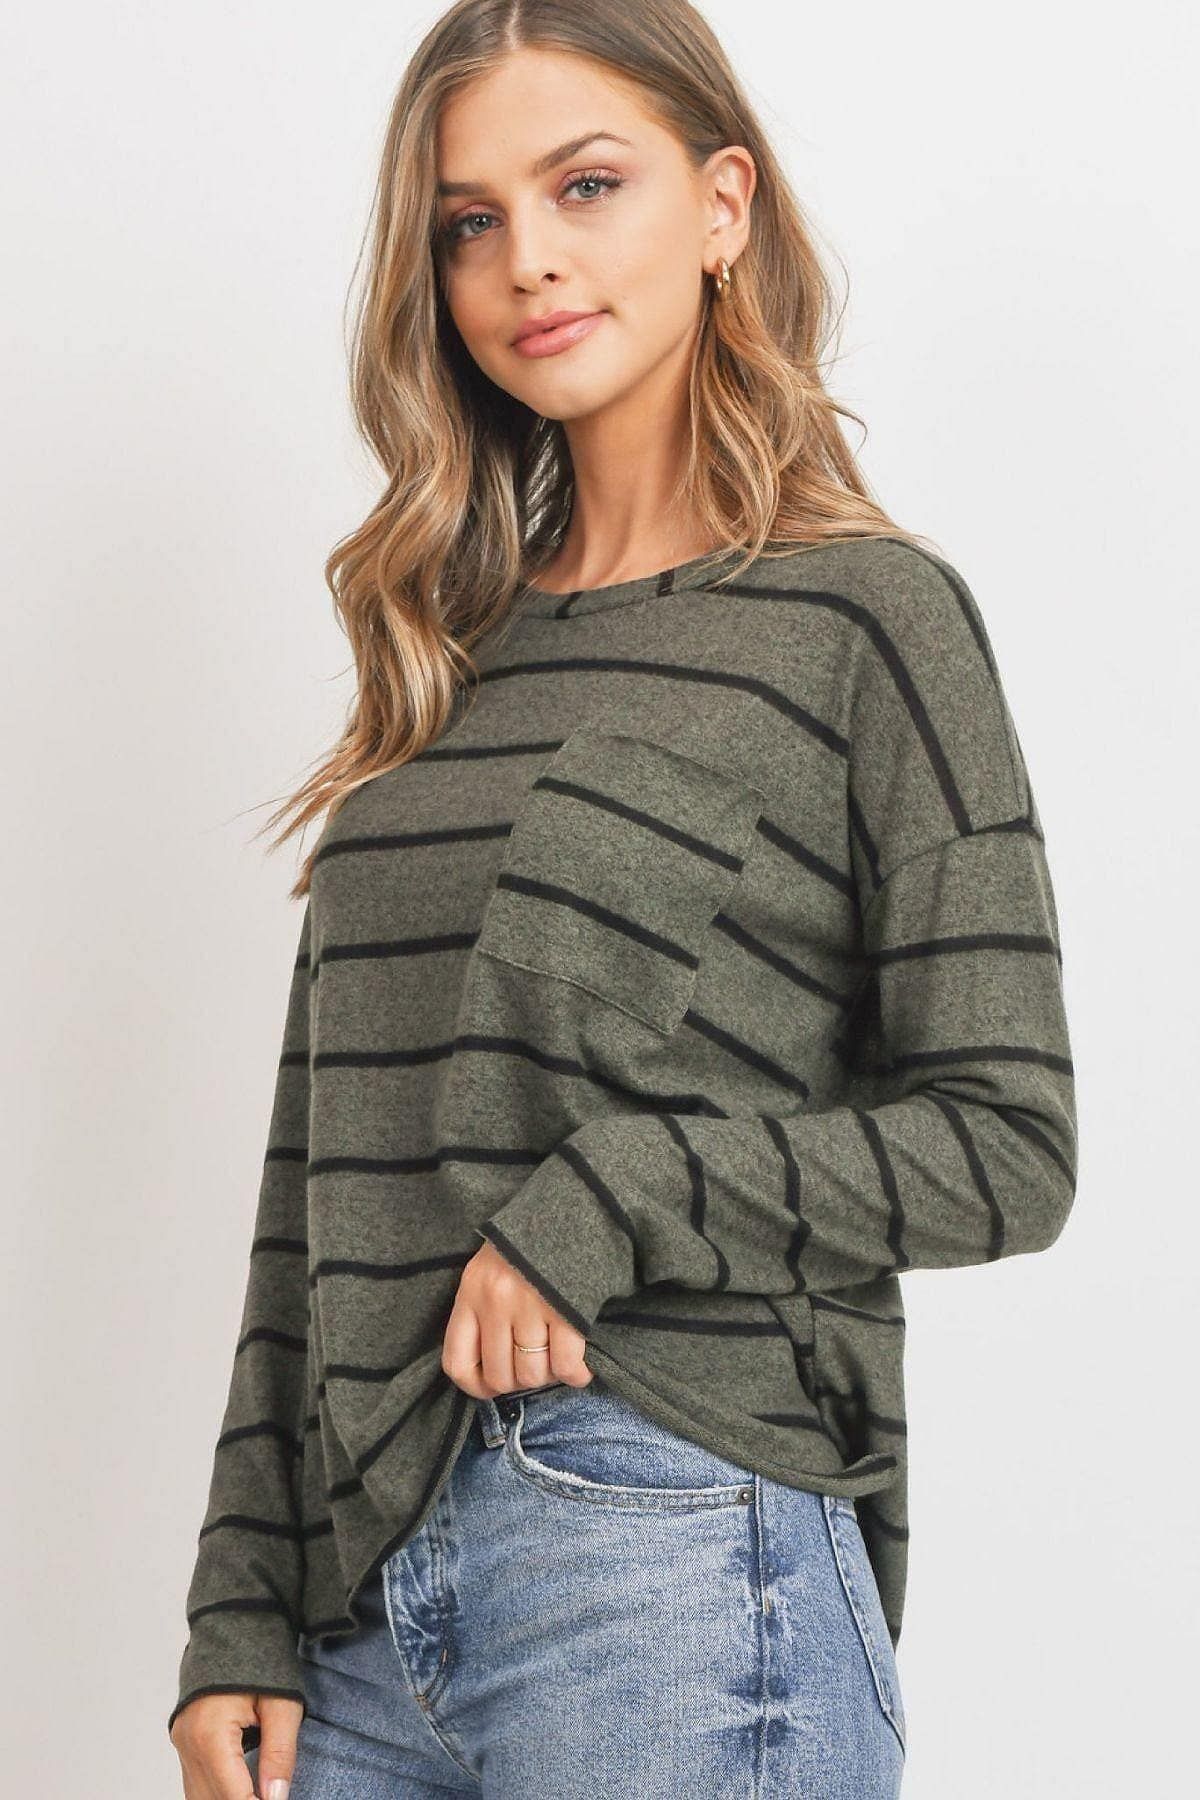 Olive Long Sleeve Stripe Top - Shopping Therapy, LLC Shirts & Tops